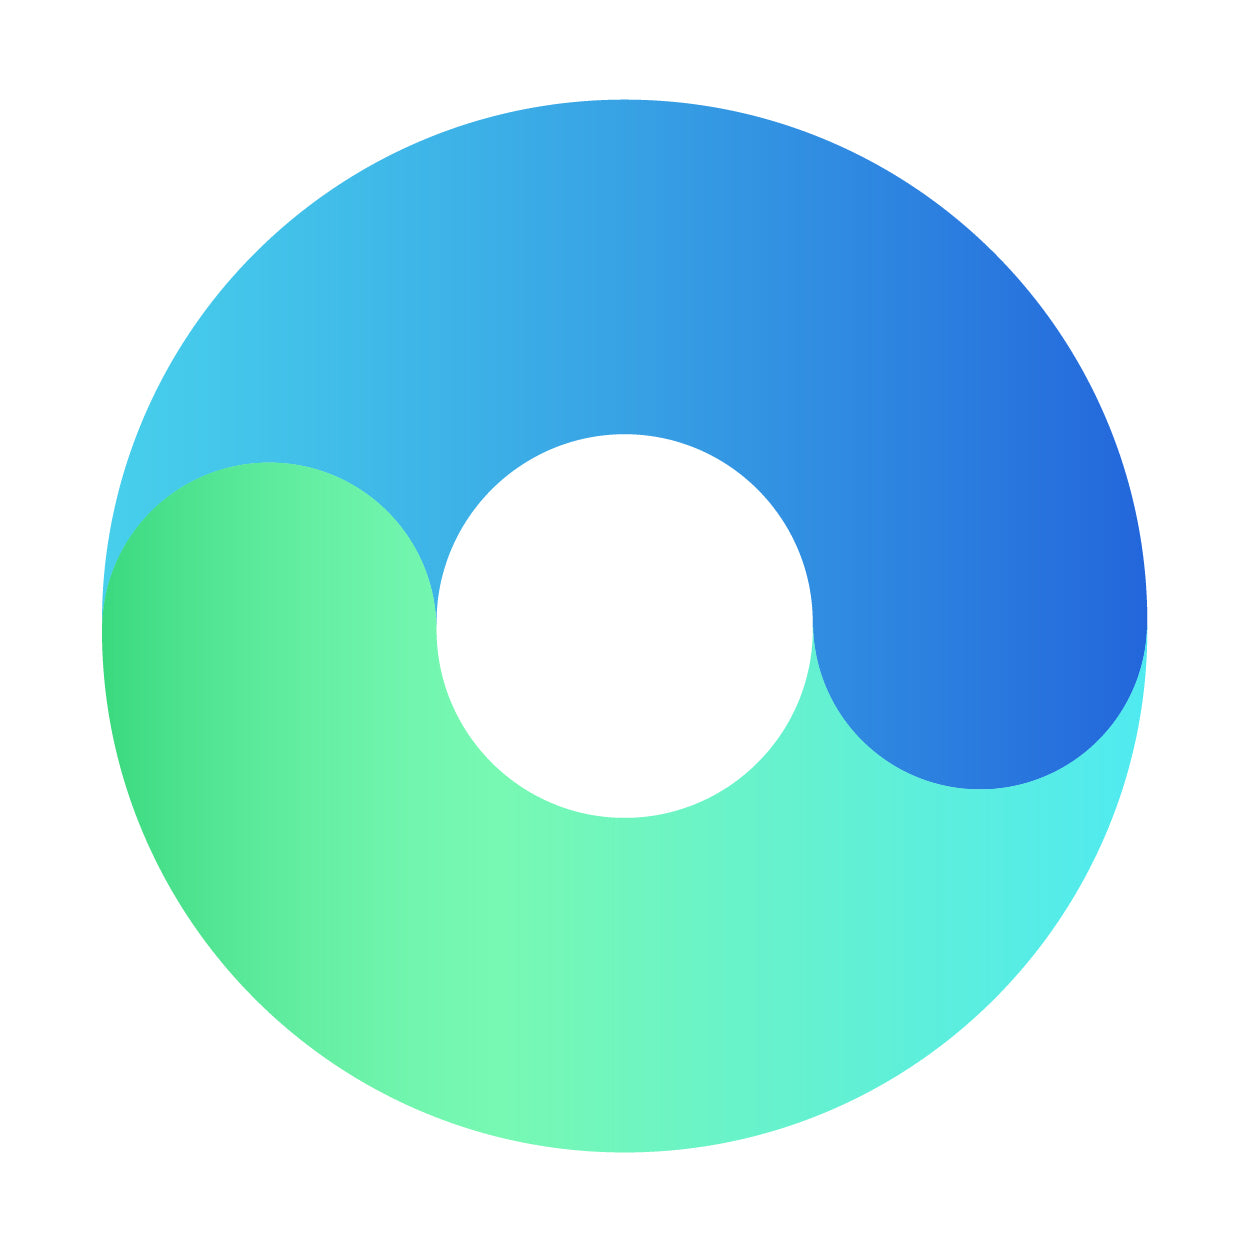 EcoPro blue and green circle logo device